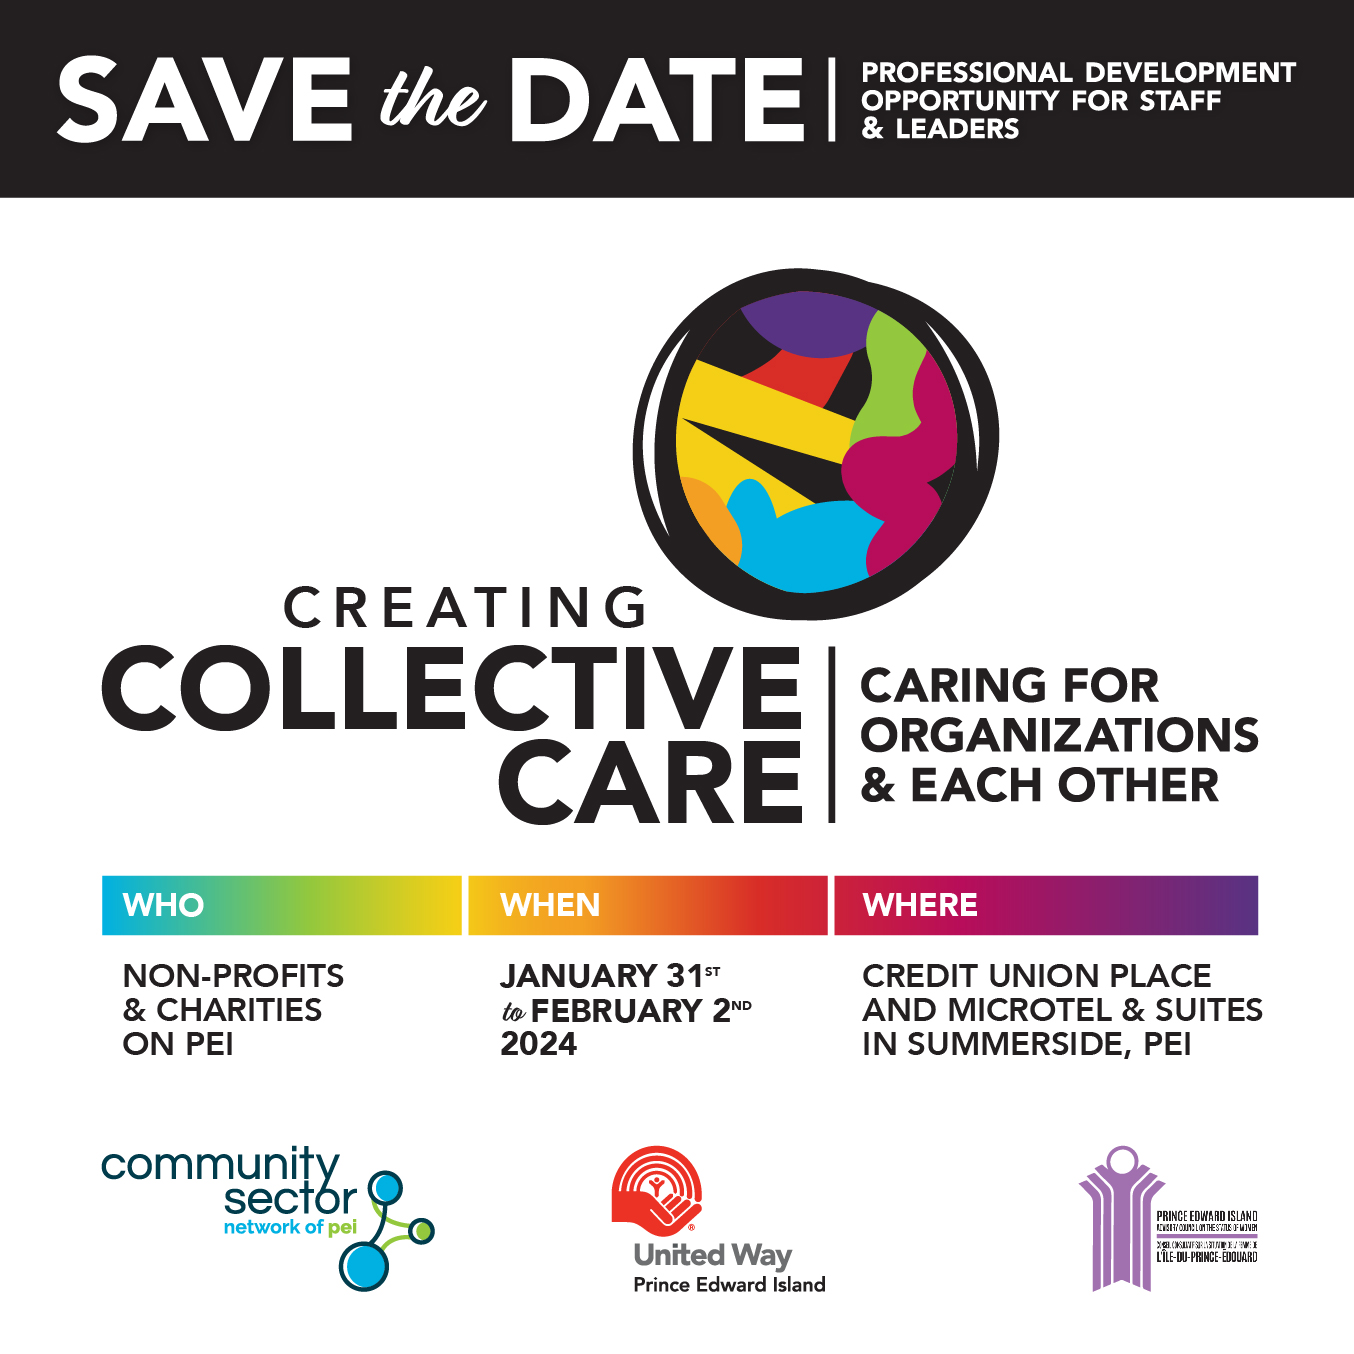 Save the Date! Creating Collective Care conference